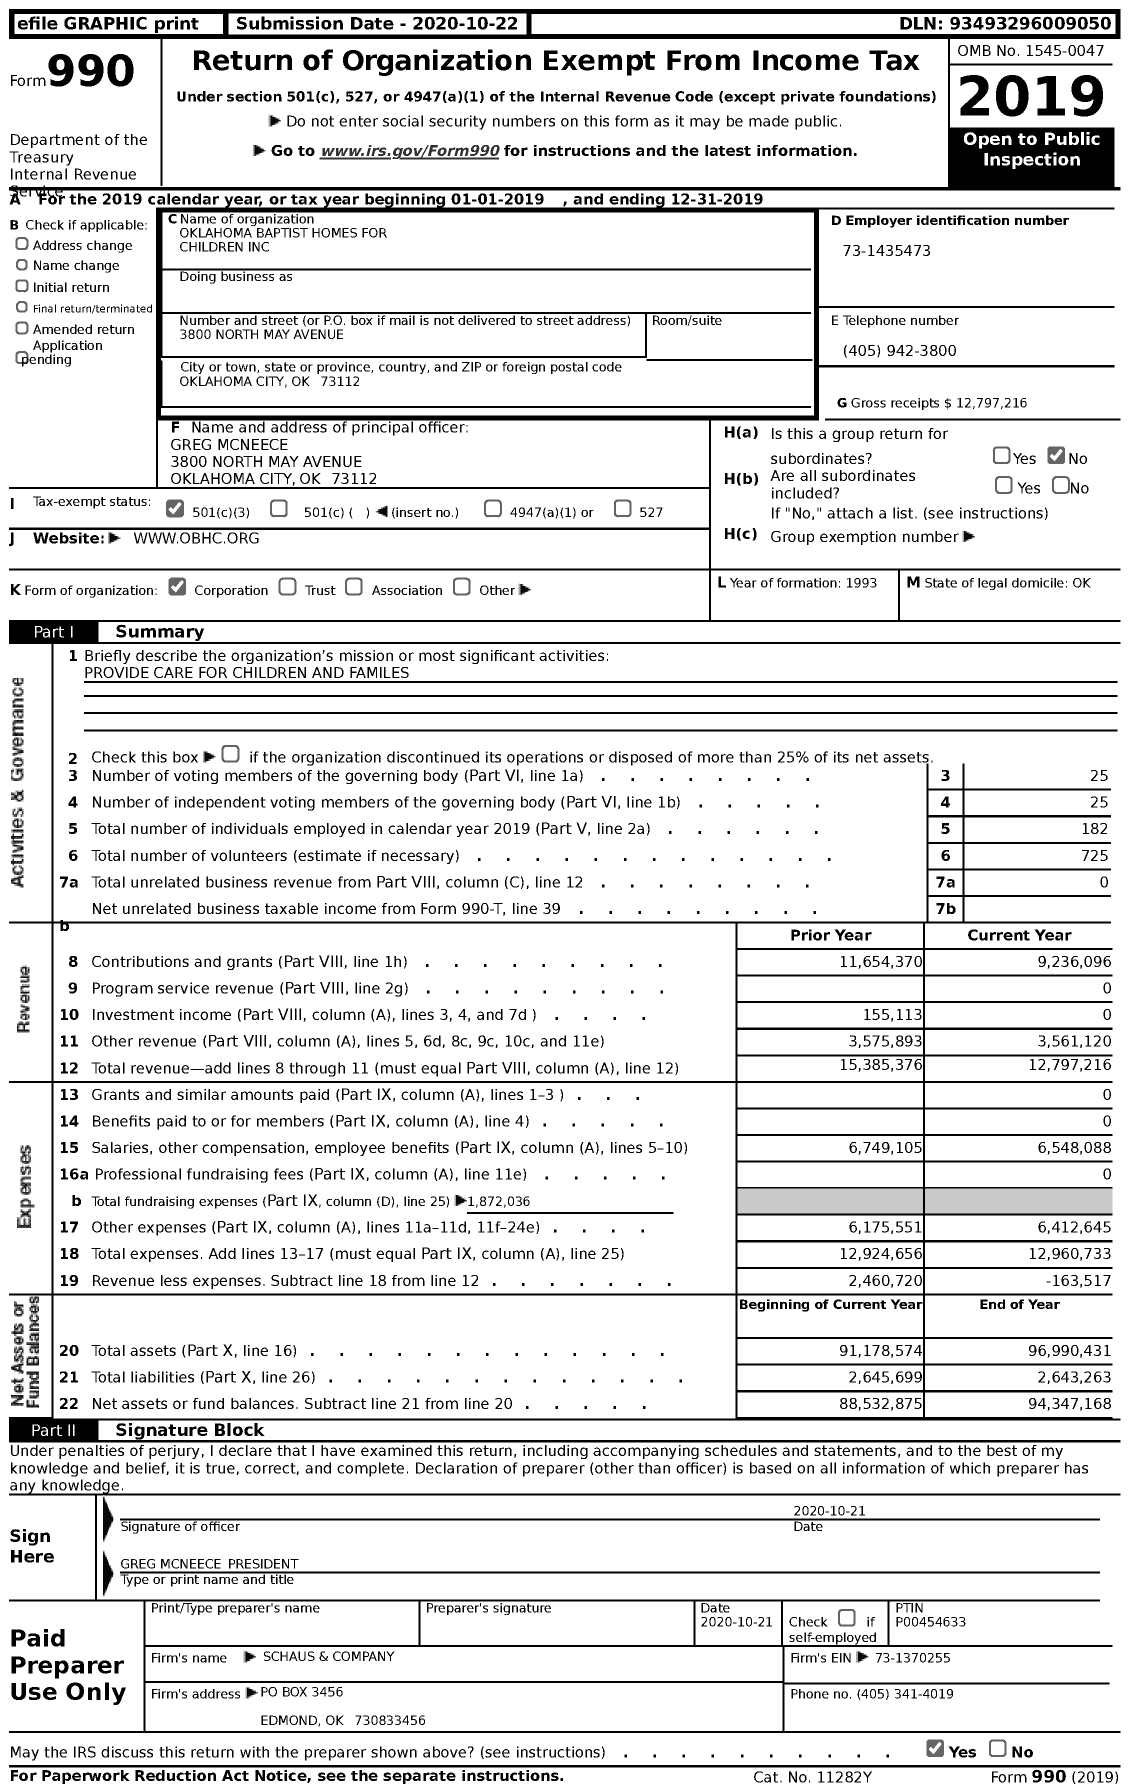 Image of first page of 2019 Form 990 for Oklahoma Baptist Homes for Children (OBHC)